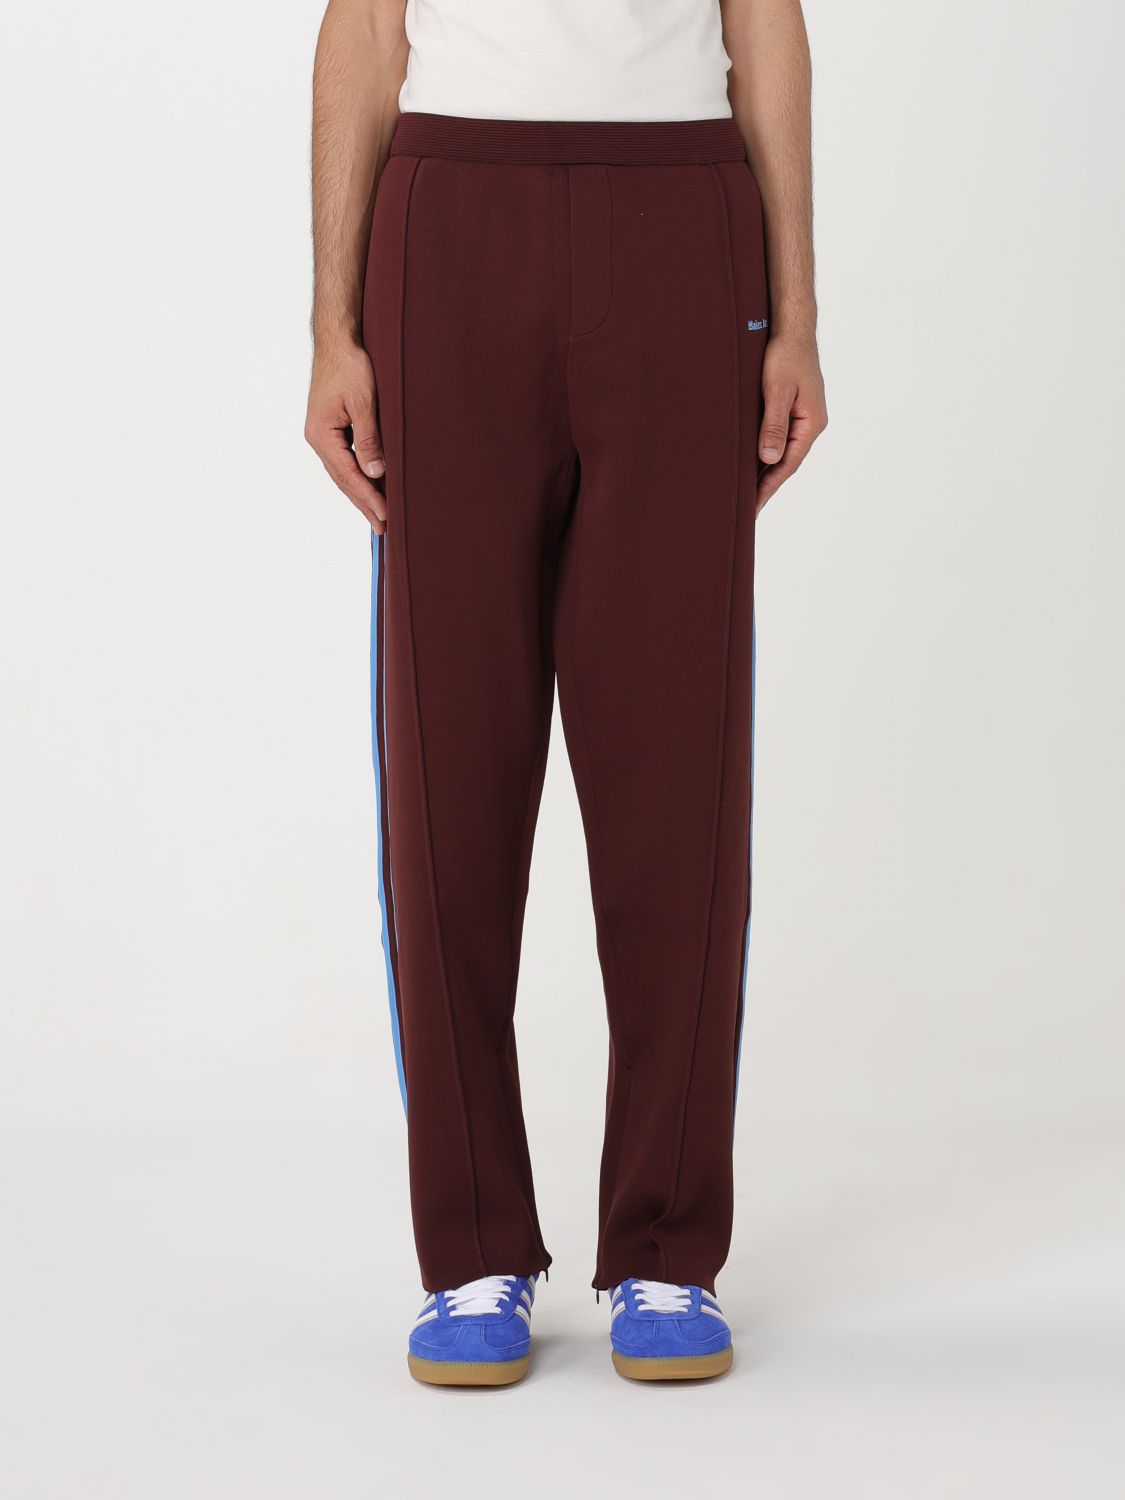 Adidas Originals By Wales Bonner Trousers ADIDAS ORIGINALS BY WALES BONNER Men colour Brown